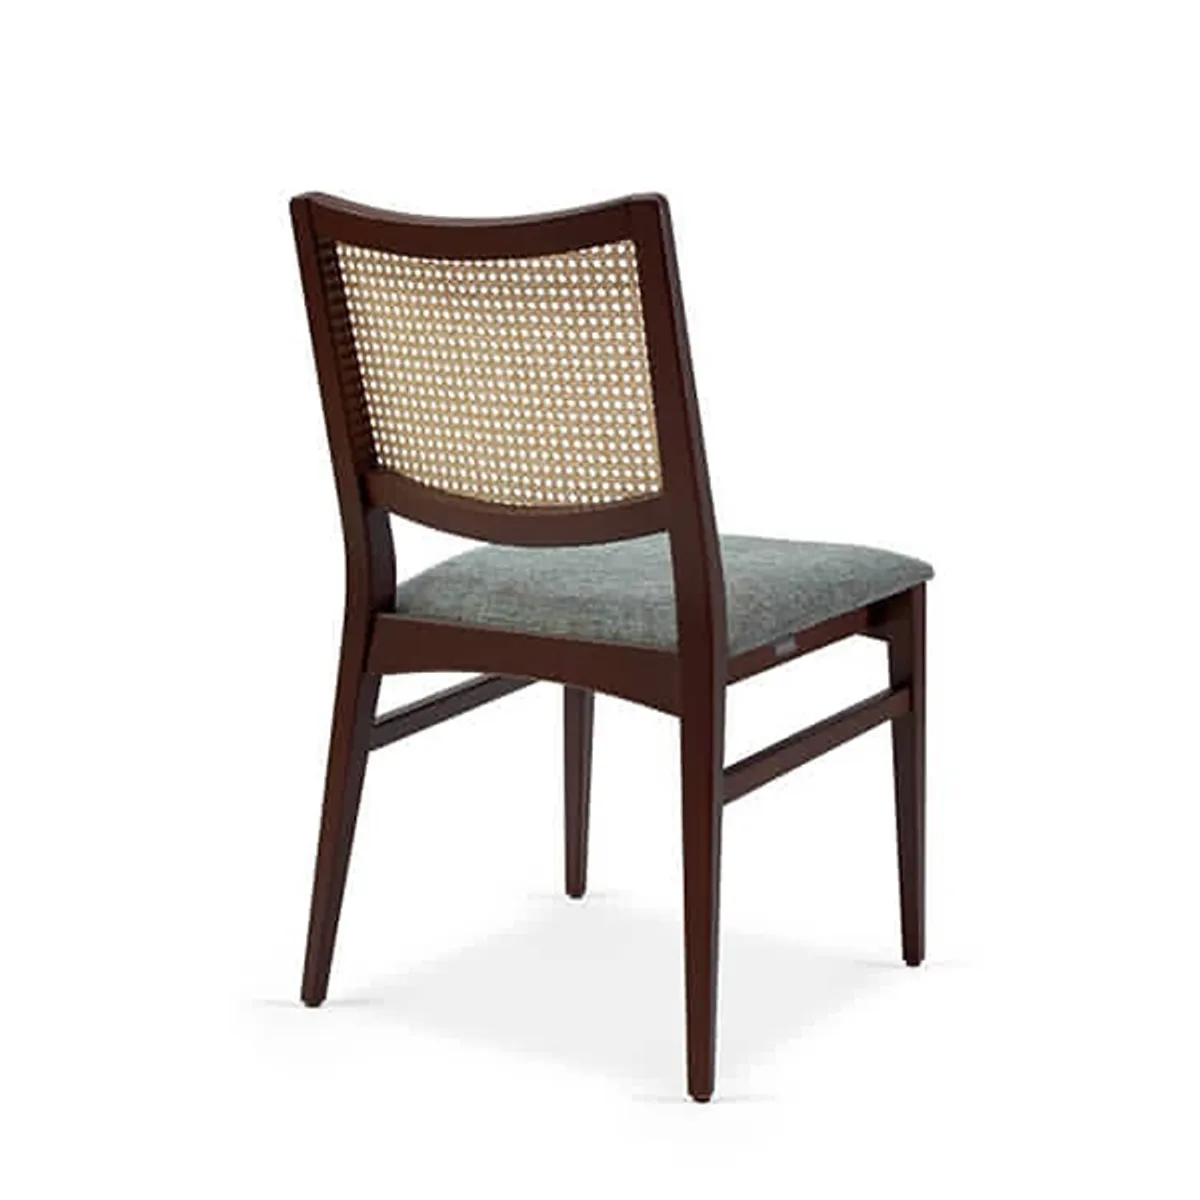 Spirit Cane Back Side Chair Inside Out Contracts J2